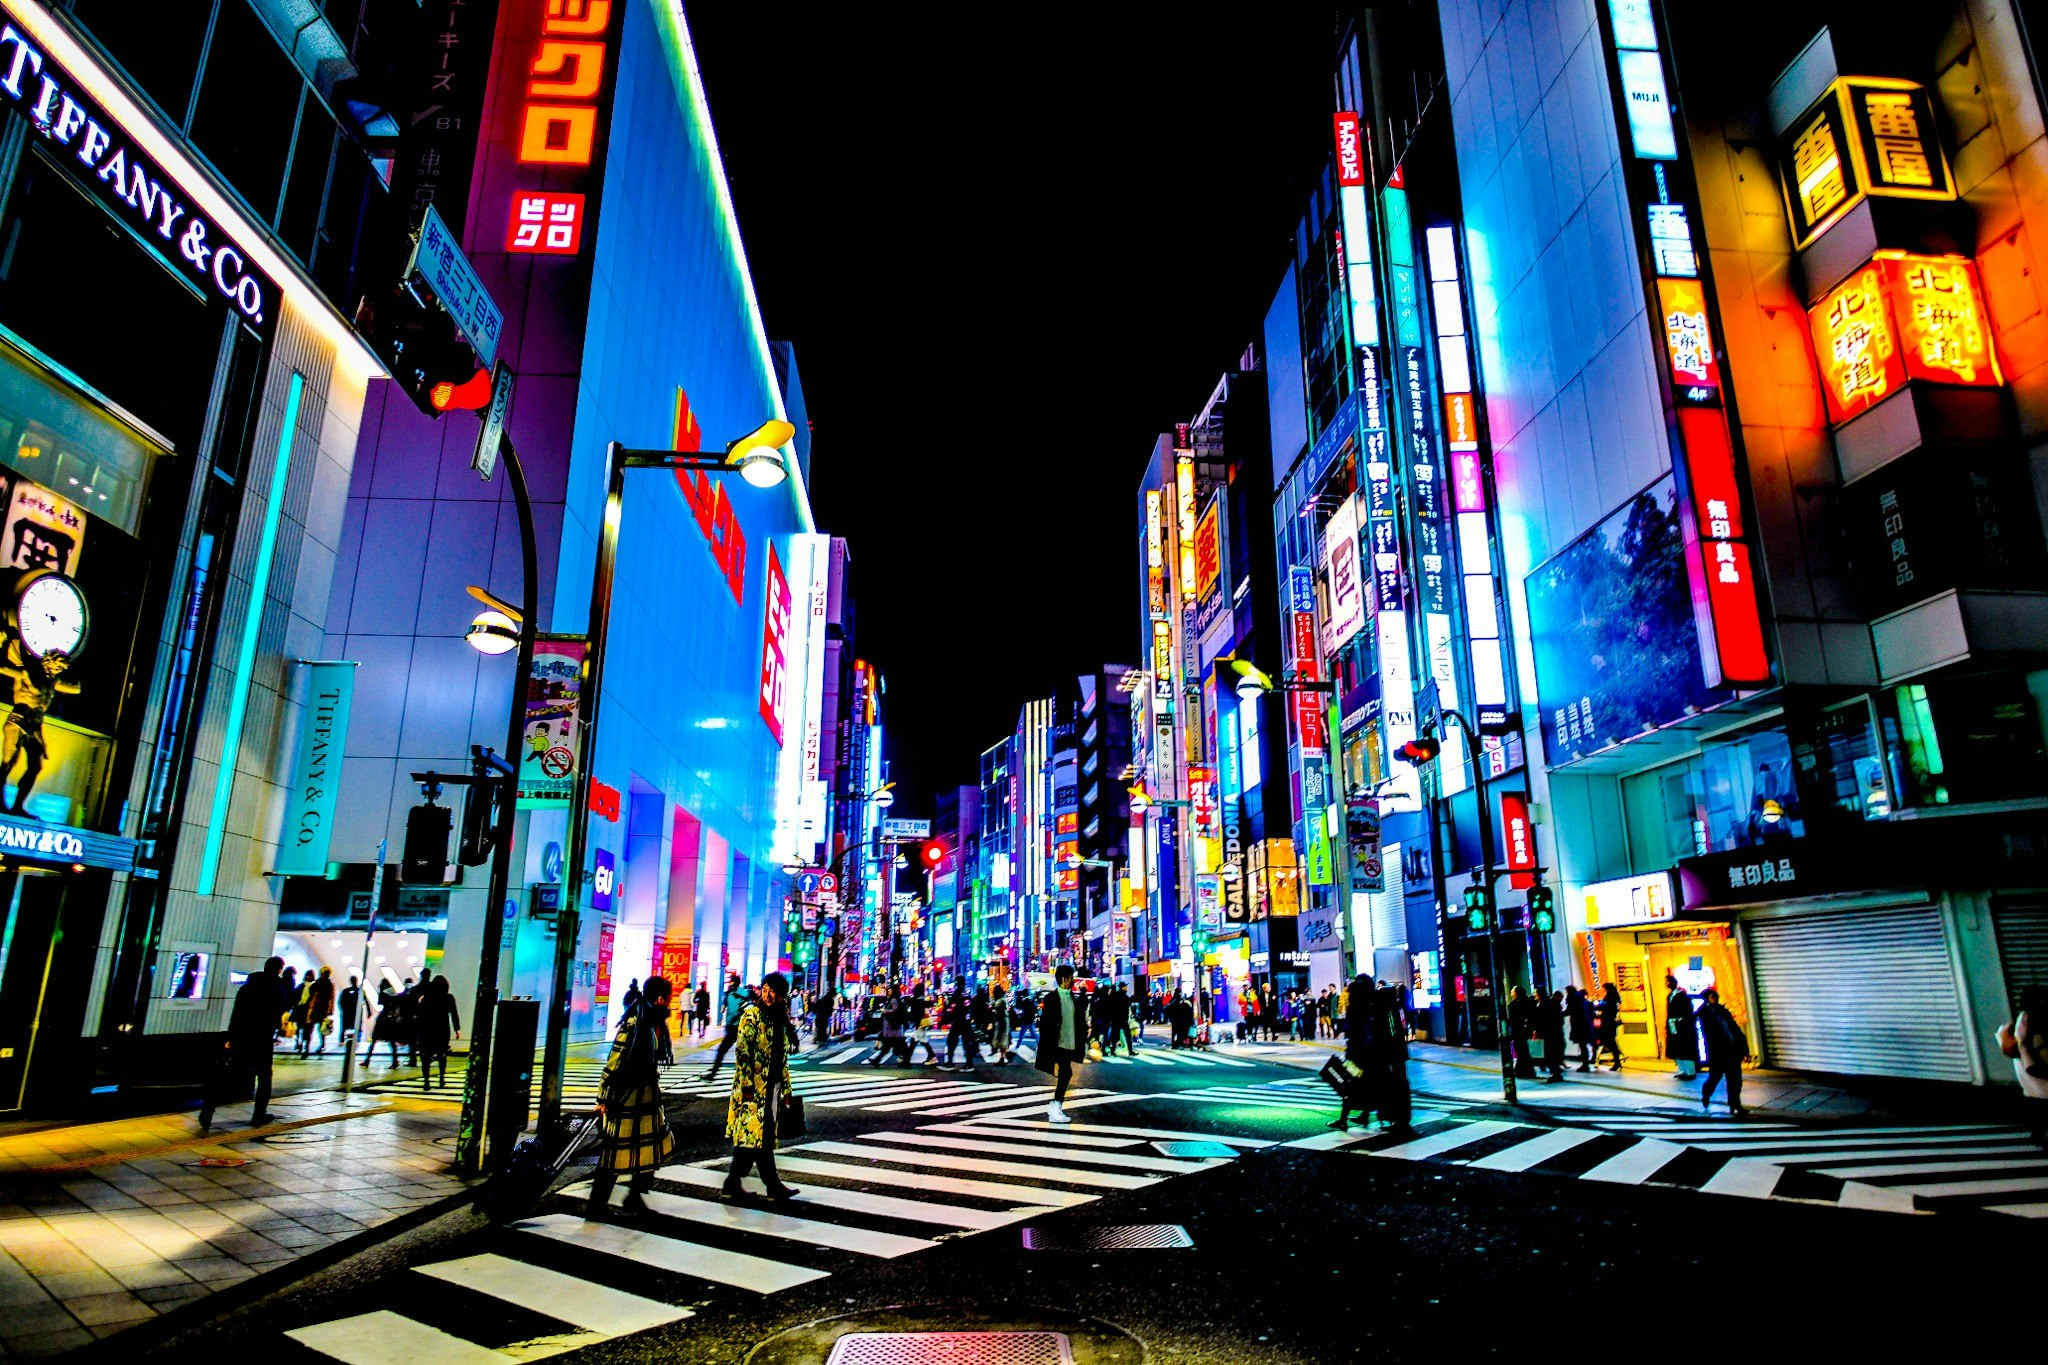 A street scene in Tokyo. Neon lighting illuminates the walls, while, below, large groups of people walk along the road.